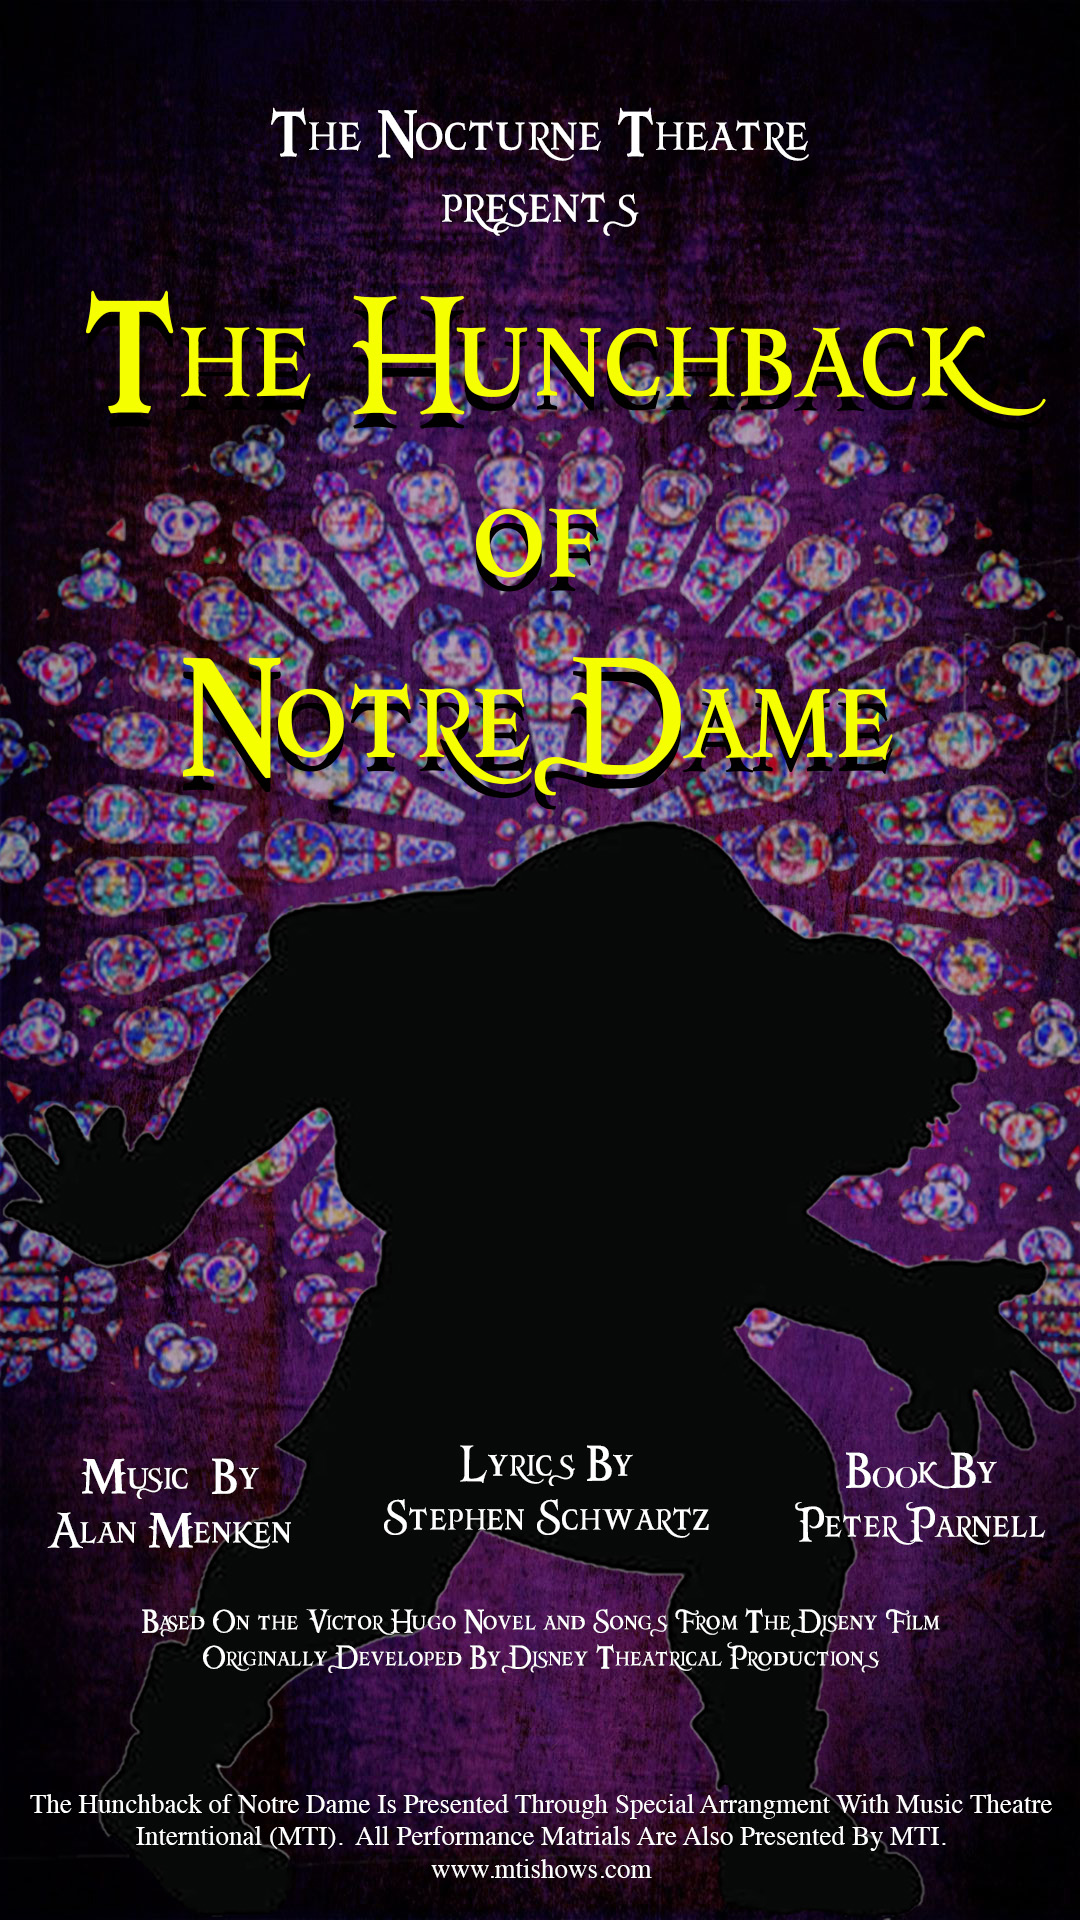 The Hunchback of Notre Dame Musical at The Nocturne Theatre in Los Angeles - Official Poster